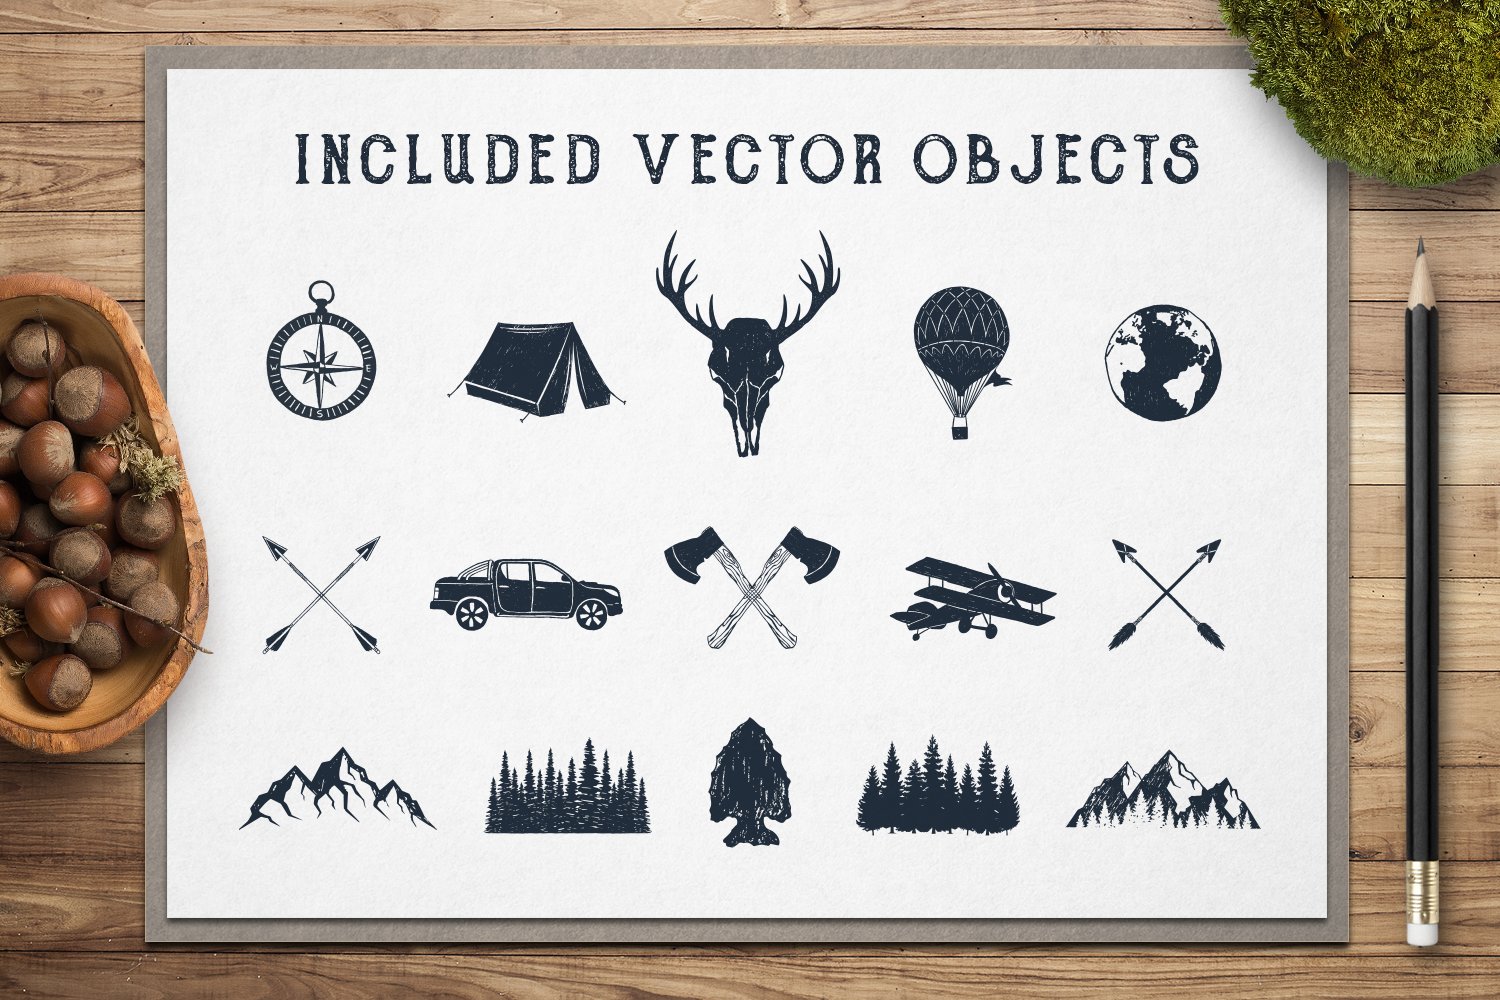 This logos collection included some vector objects.